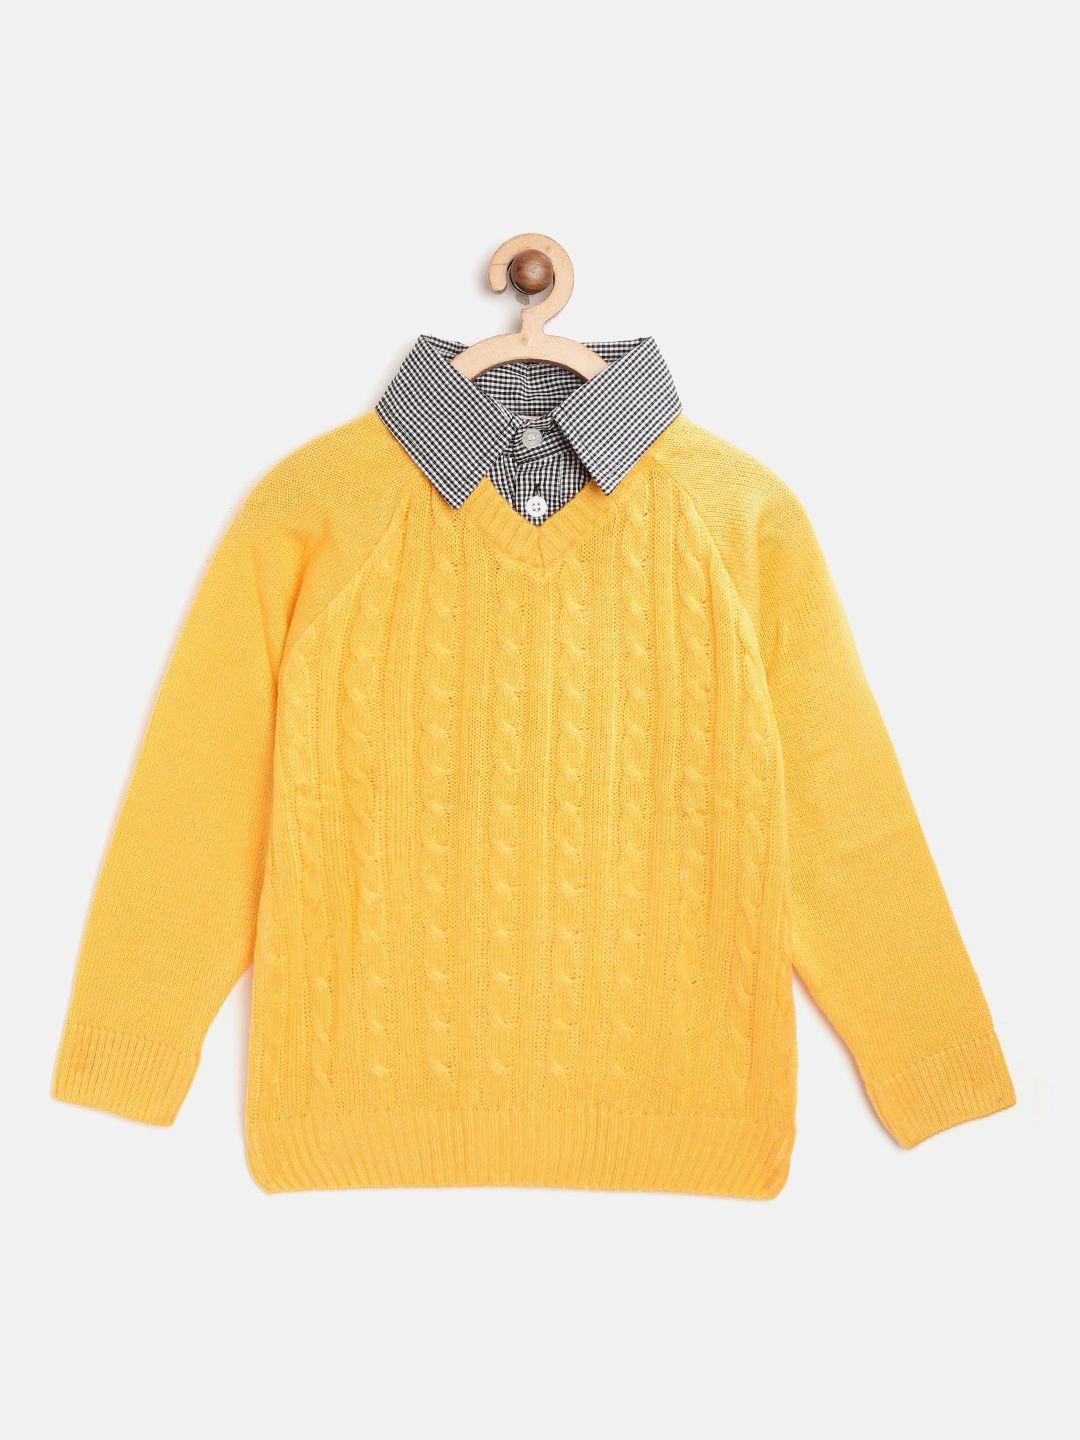 yk-boys-mustard-yellow-cable-knit-sweater